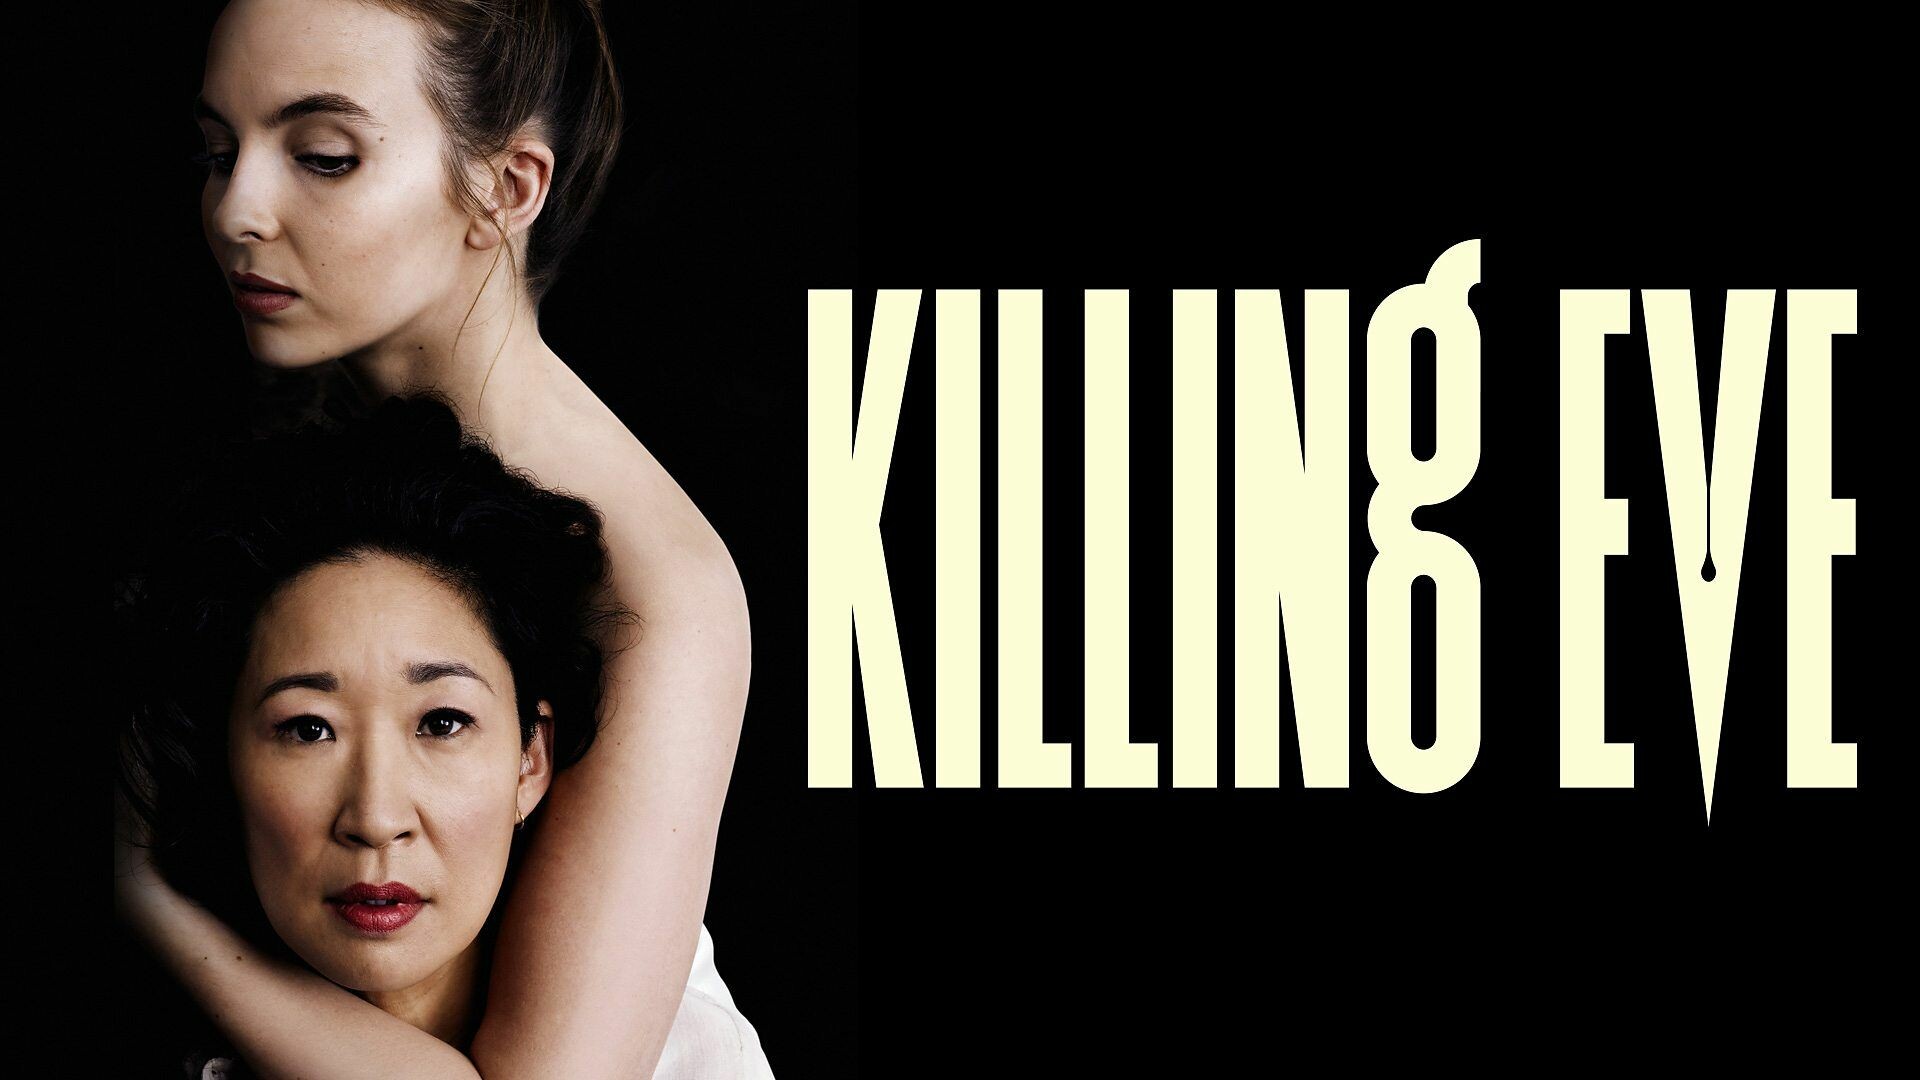 Killing Eve: In the United Kingdom, the series was shown on BBC One in September 2018. 1920x1080 Full HD Wallpaper.